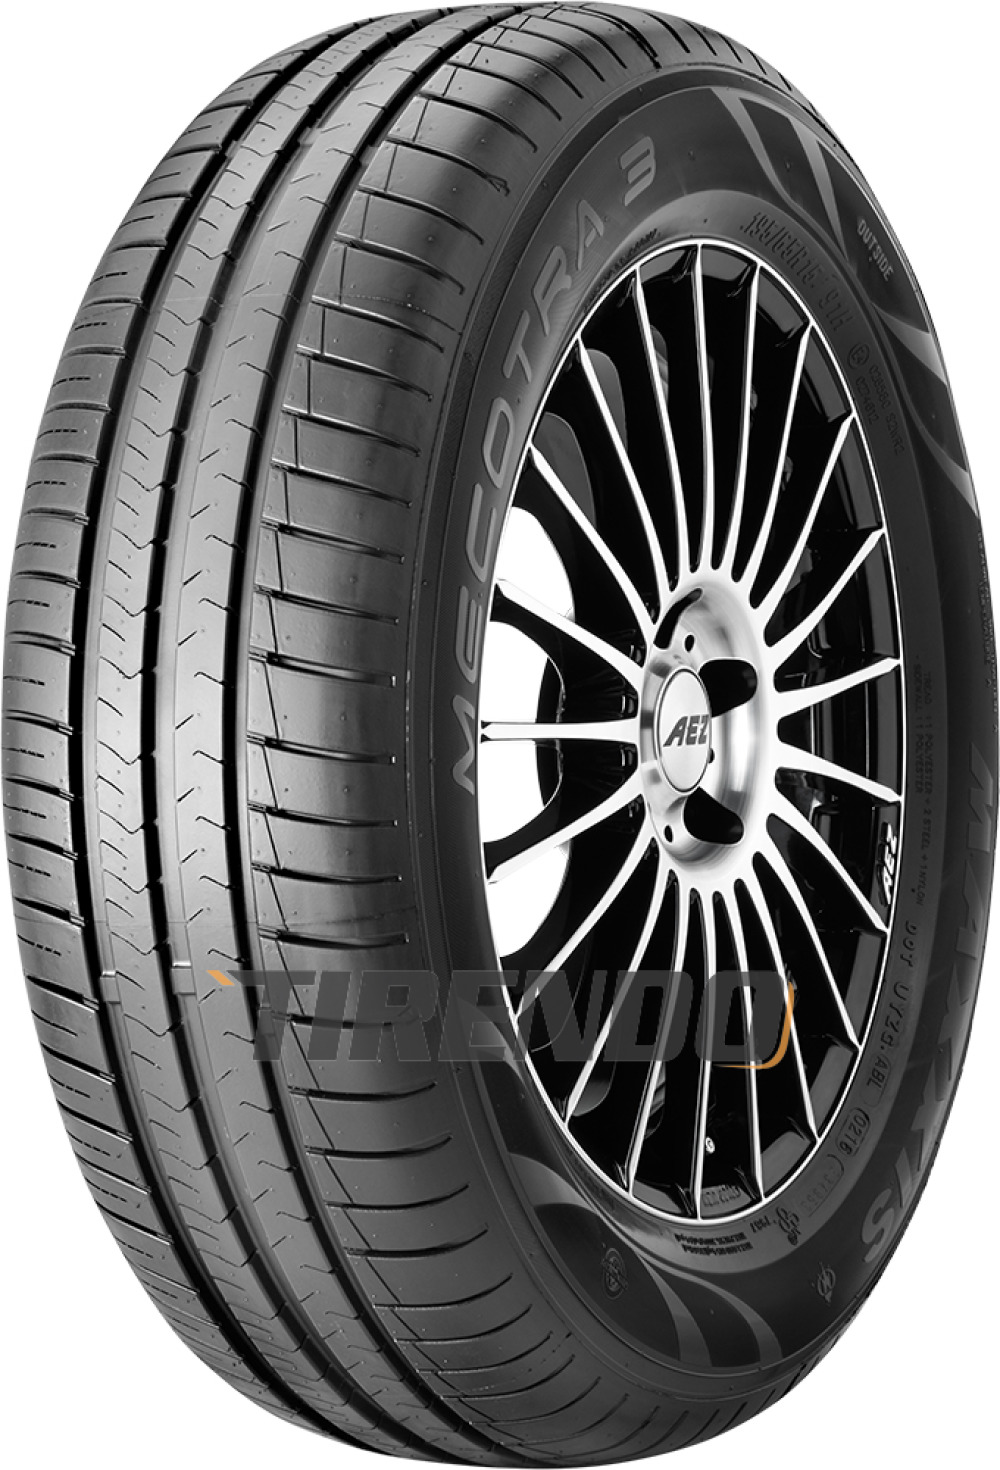 Maxxis Mecotra 3 ( 195/65 R14 89H ) von Maxxis